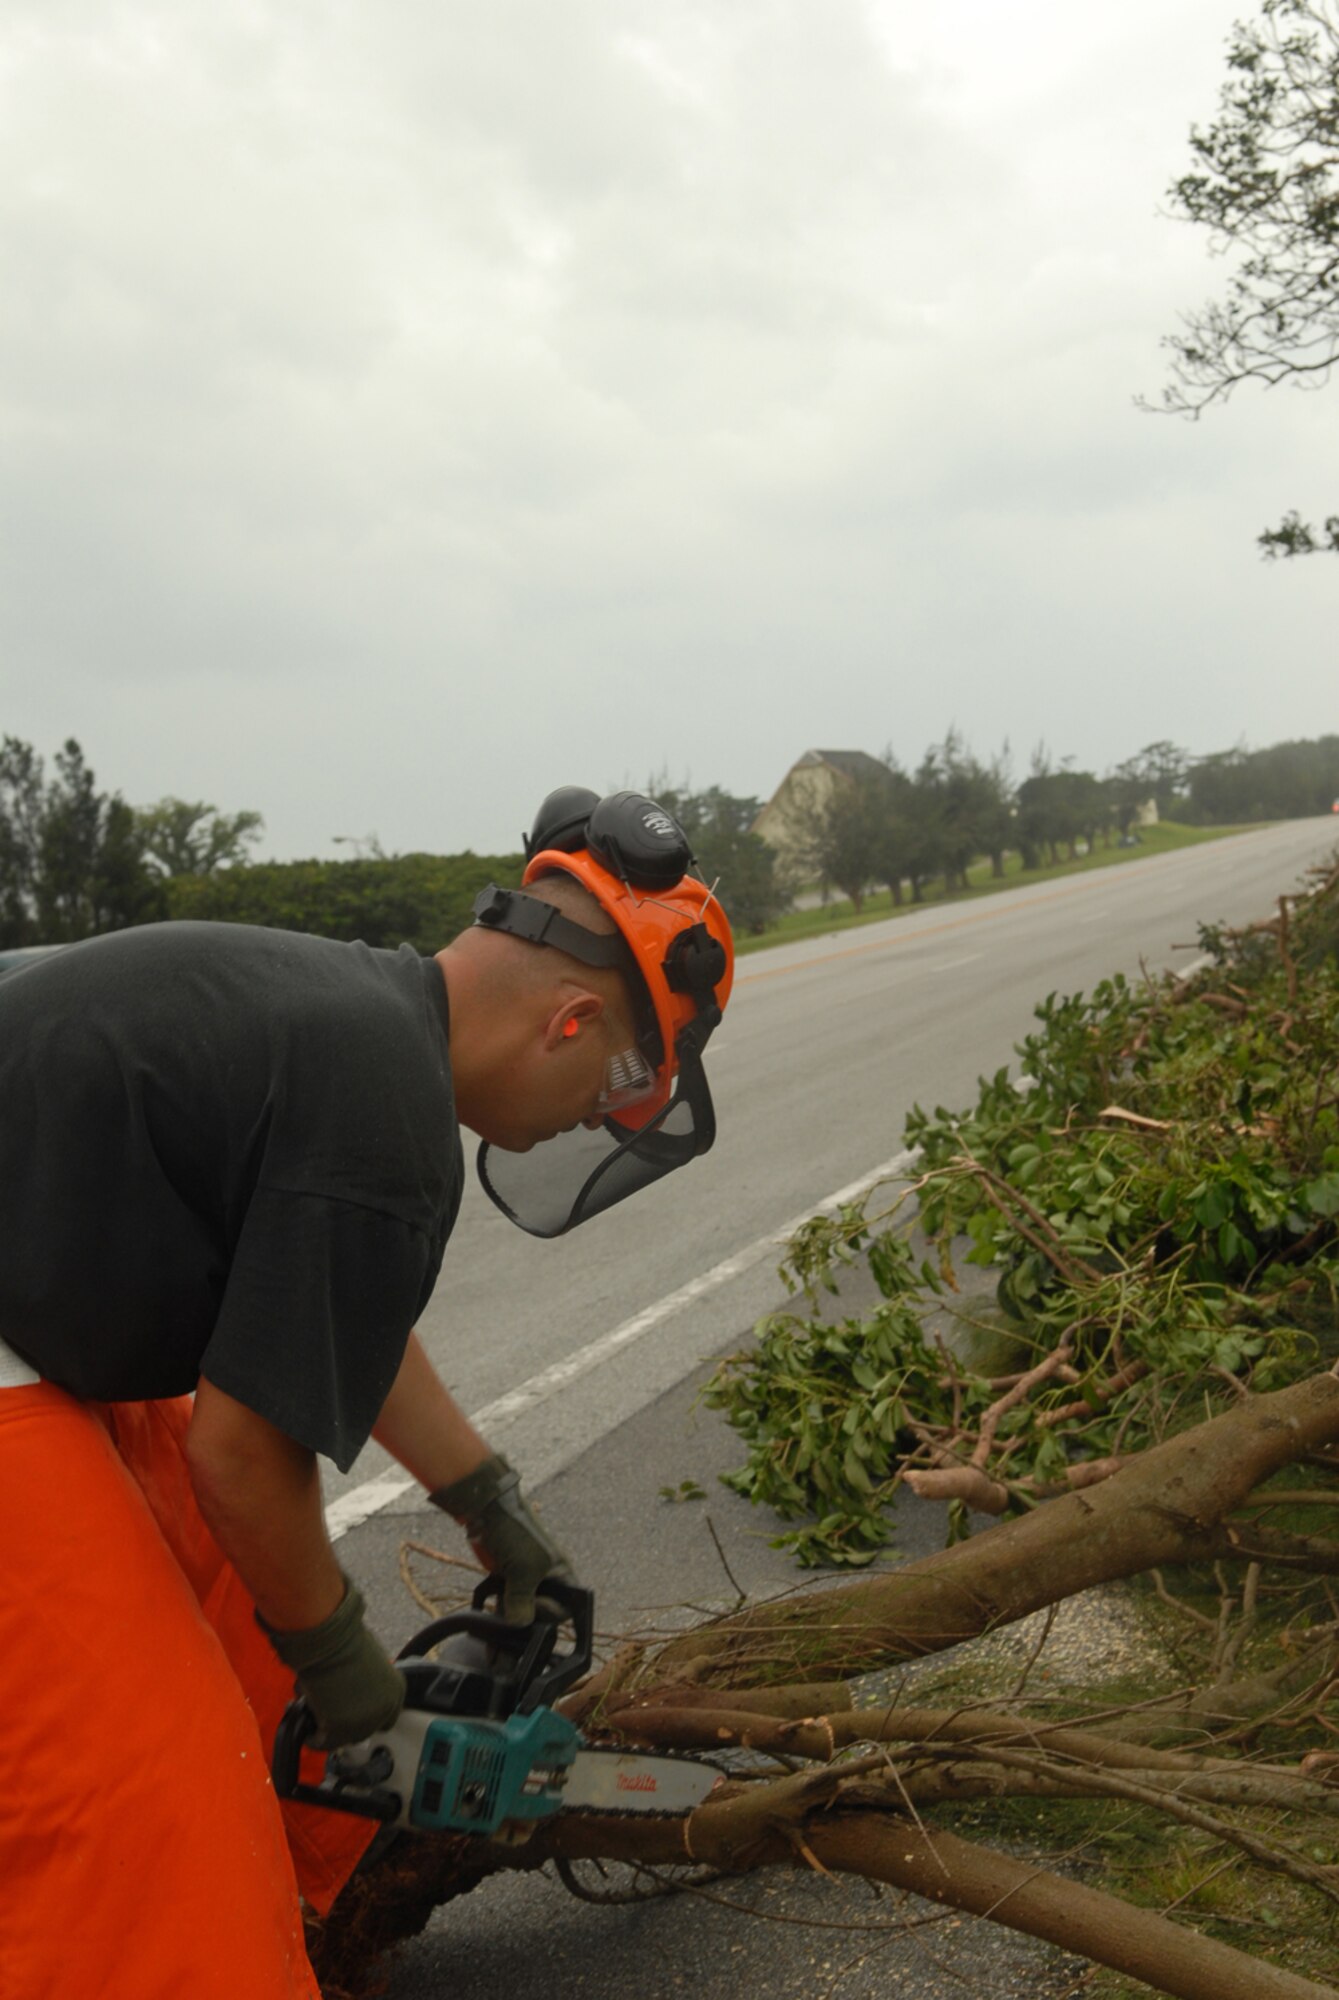 Tech. Sgt. John Platz cuts large downed branches with a chainsaw  at Kadena Air Base, Japan, July 14, 2007. The fallen branches were a result of Typhoon Man-Yi which brought the base 77 mph winds gusting to 105 mph.  There were no injuries or significant damages to base structures.  The typhoon was the strongest to hit the base since 2003.  Sergeant Platz is an equipment operator with the 18th Civil Engineer Squadron.  U.S. Air Force Photo/Staff Sgt. Chrissy FitzGerald